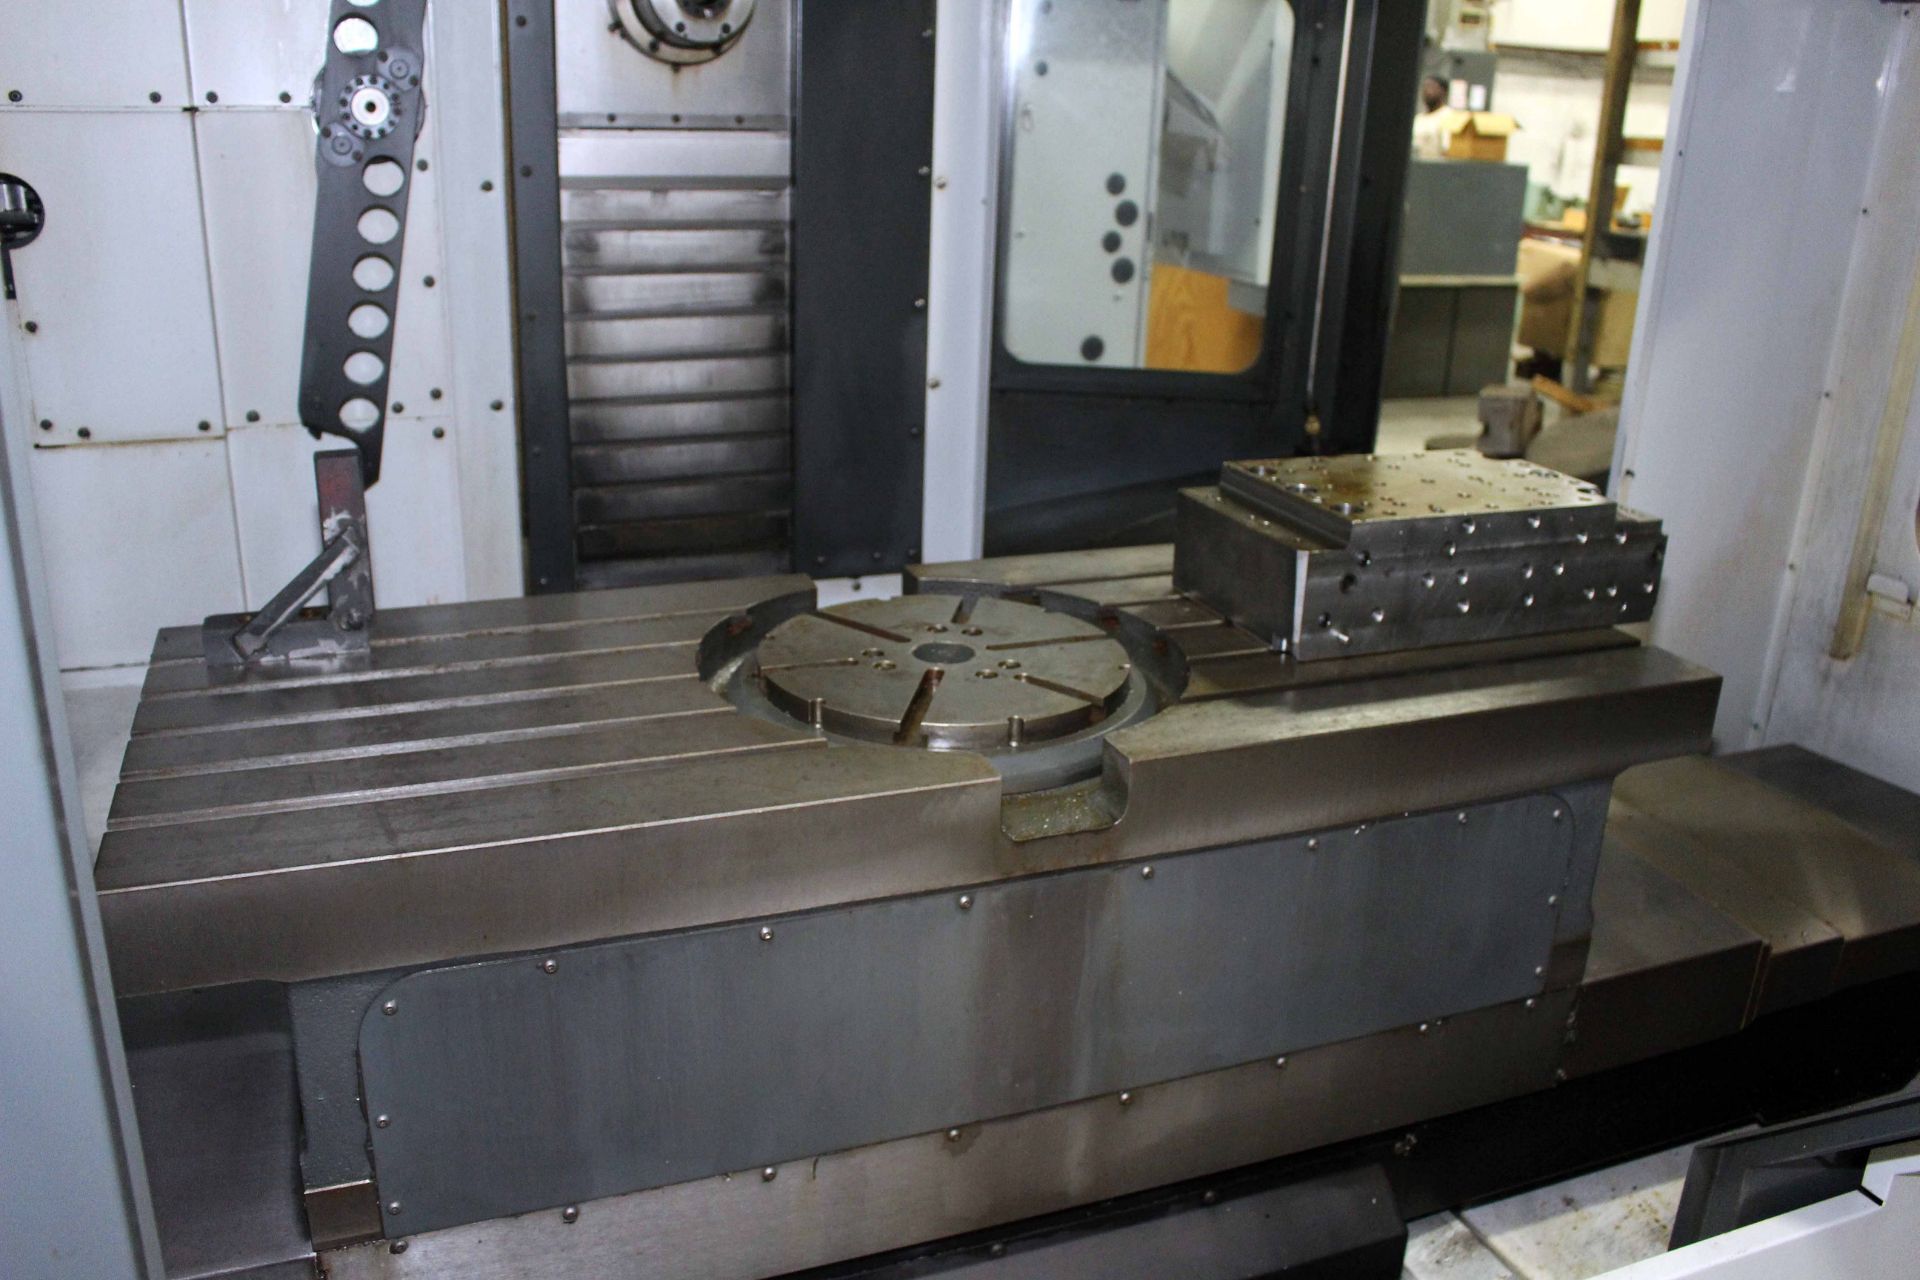 CNC 4-AXIS HORIZONTAL MACHINING CENTER, HAAS MDL. ES-5-4AX, new 11/2012, Haas CNC control, 20" x 52" - Image 3 of 4